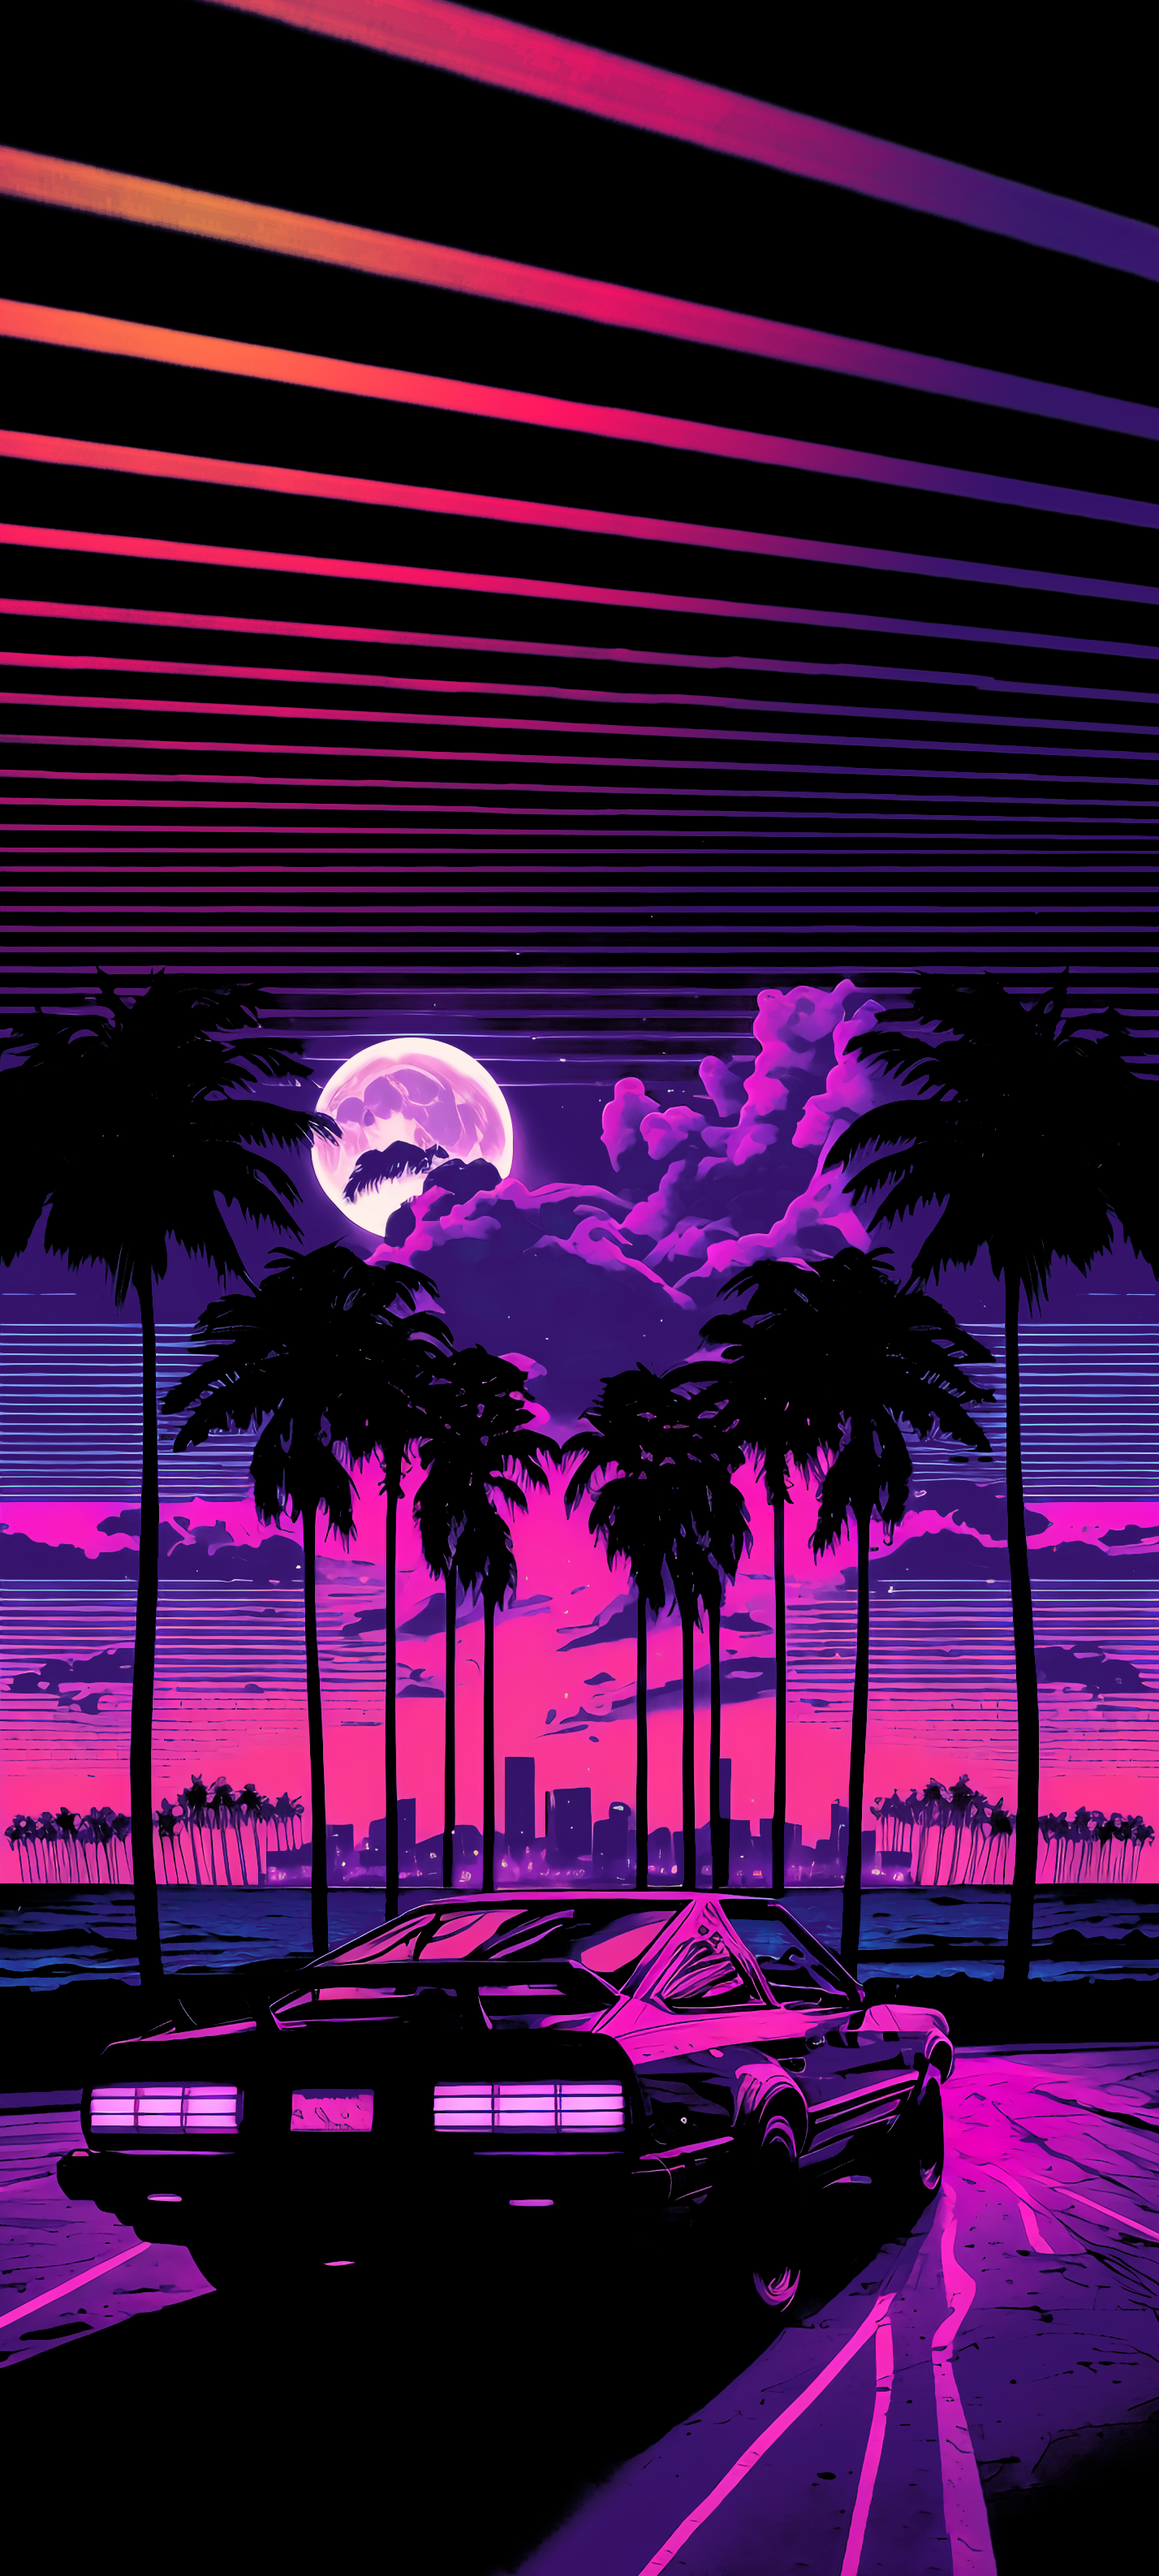 Miami Synthwave 80s VHS Wallpaper for iPhone